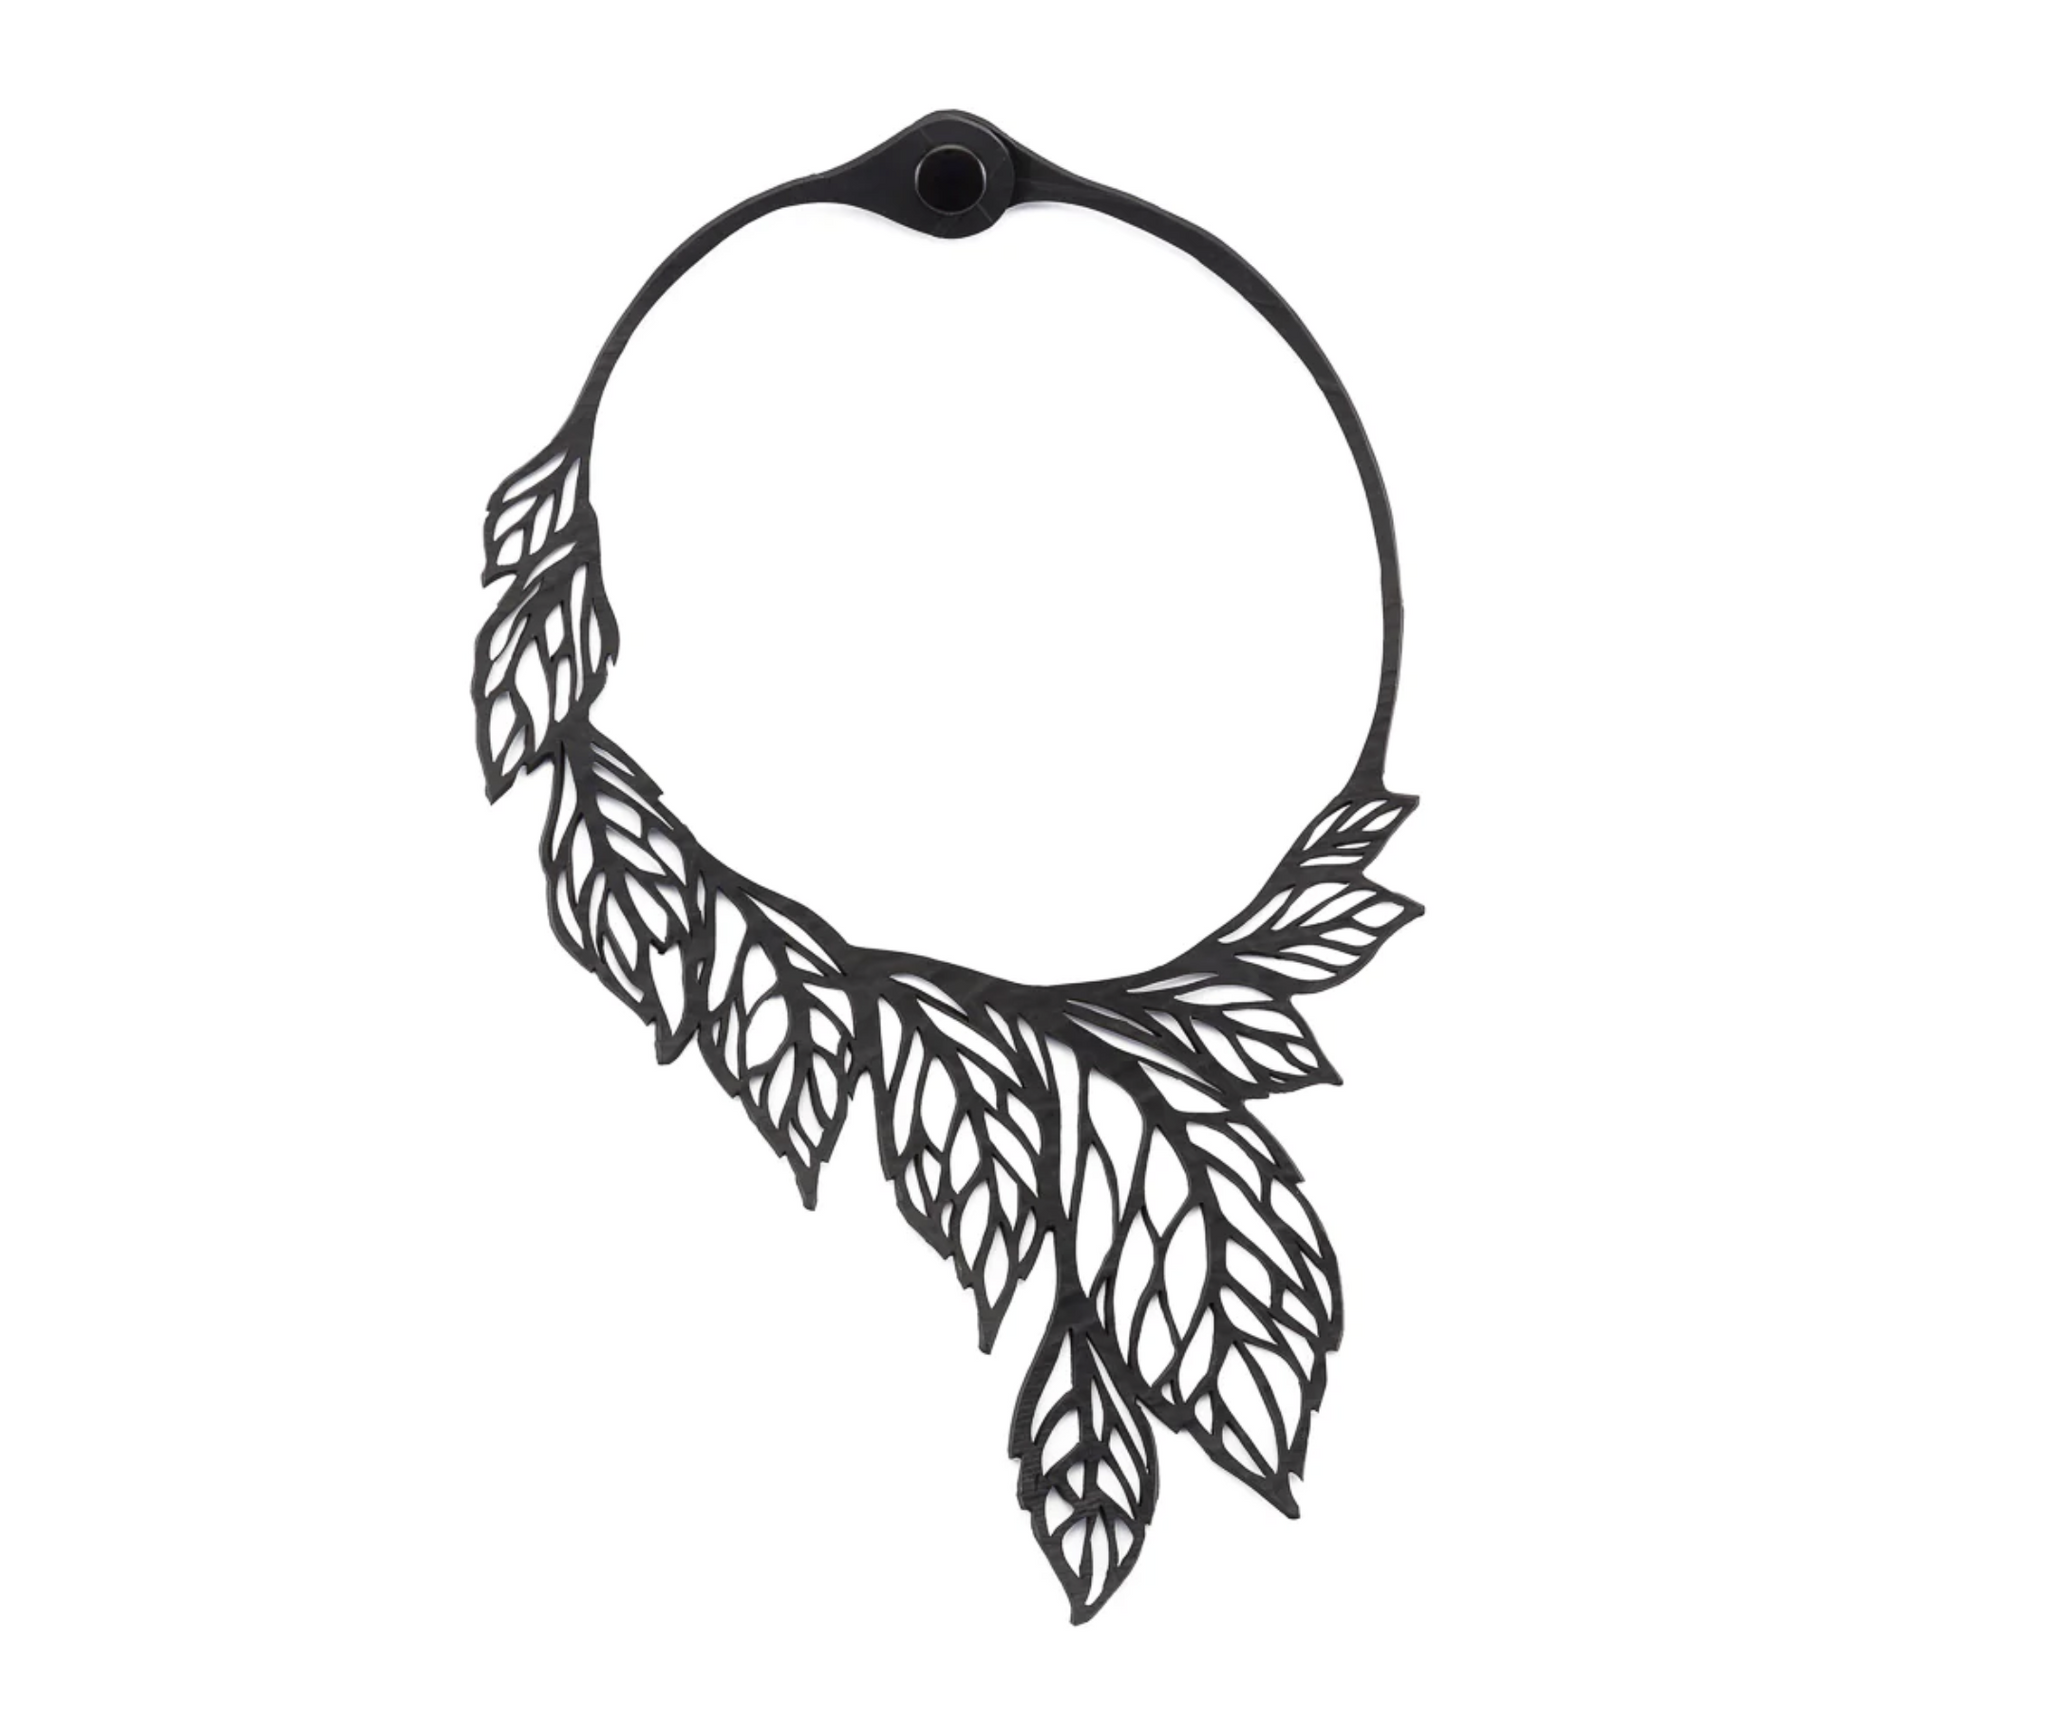 Spring Leaf Recycled Rubber Necklace by Paguro